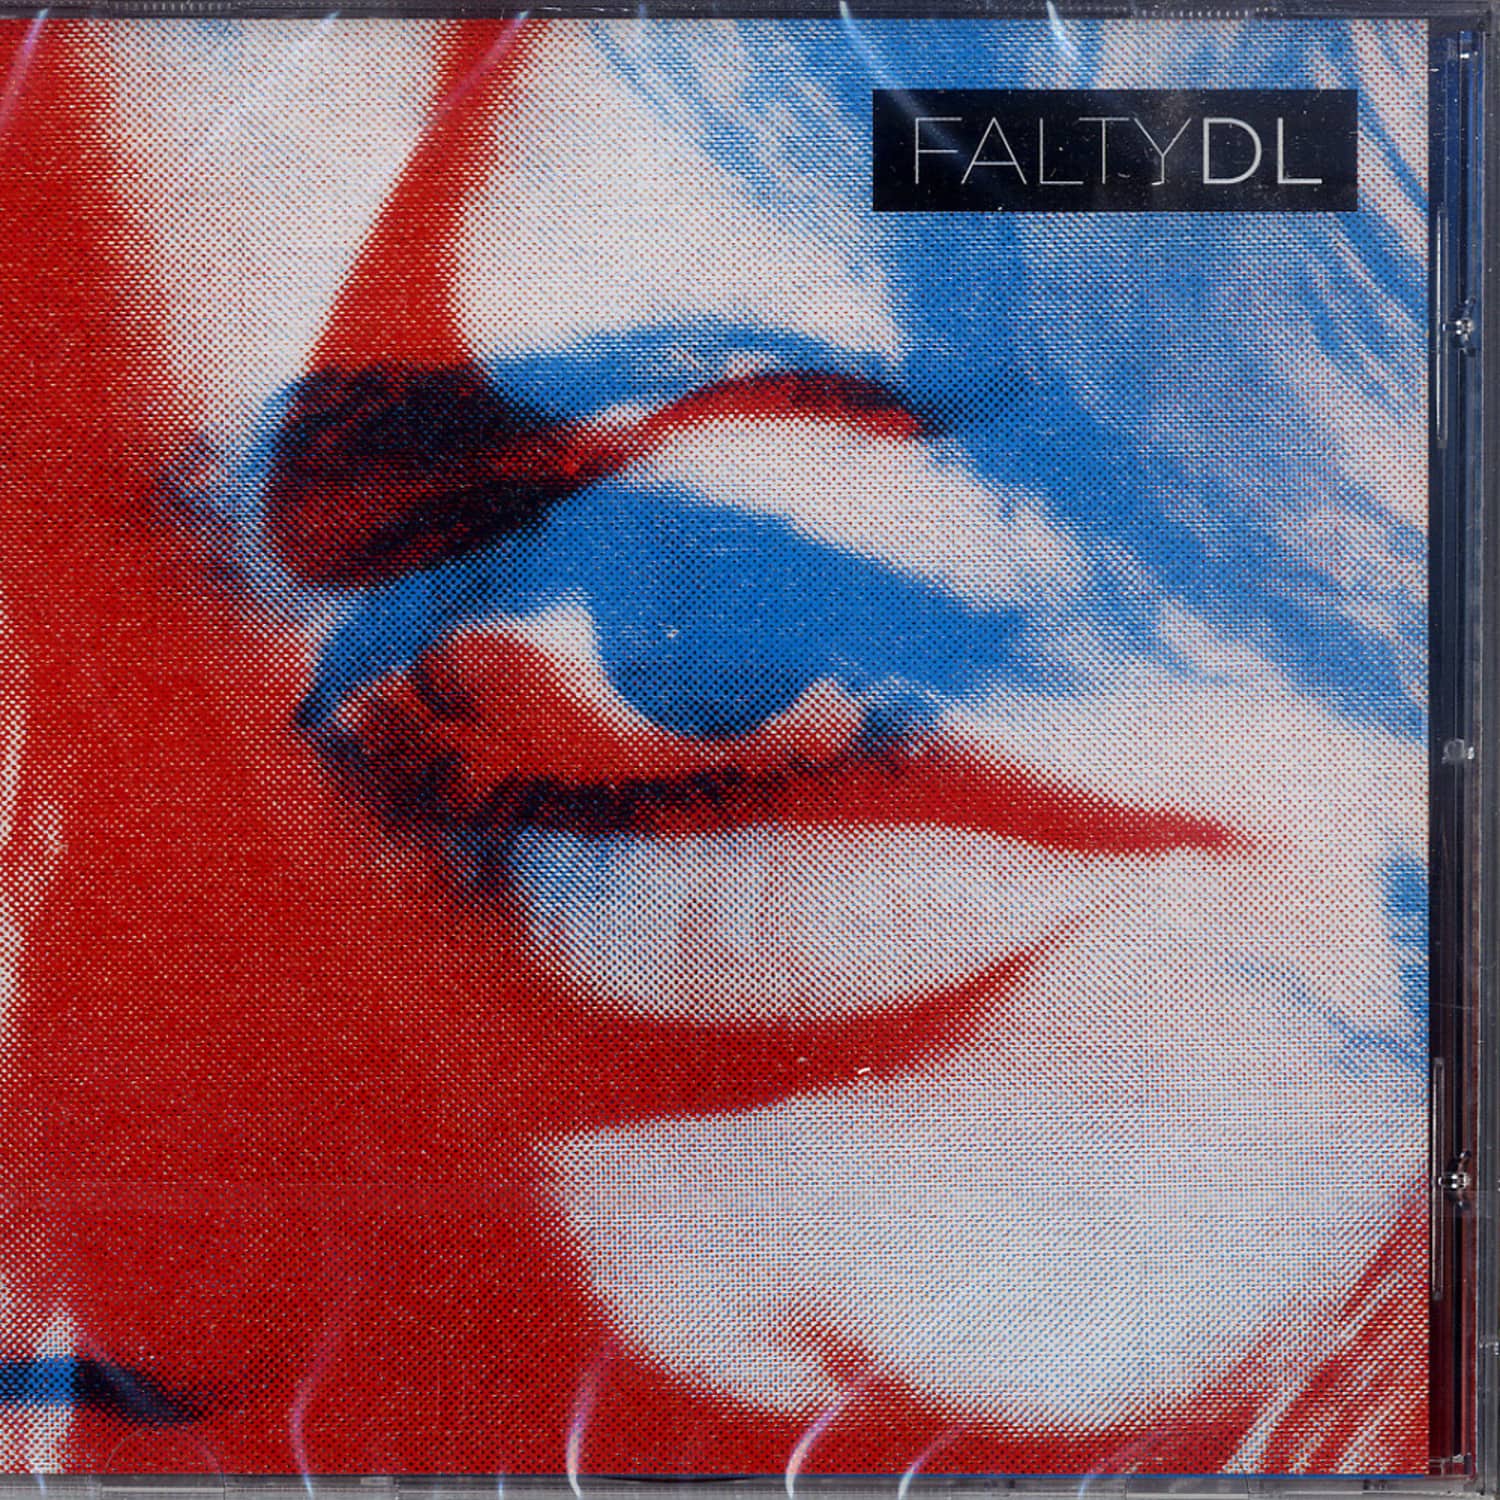 Falty DL - YOU STAND UNCERTAIN 